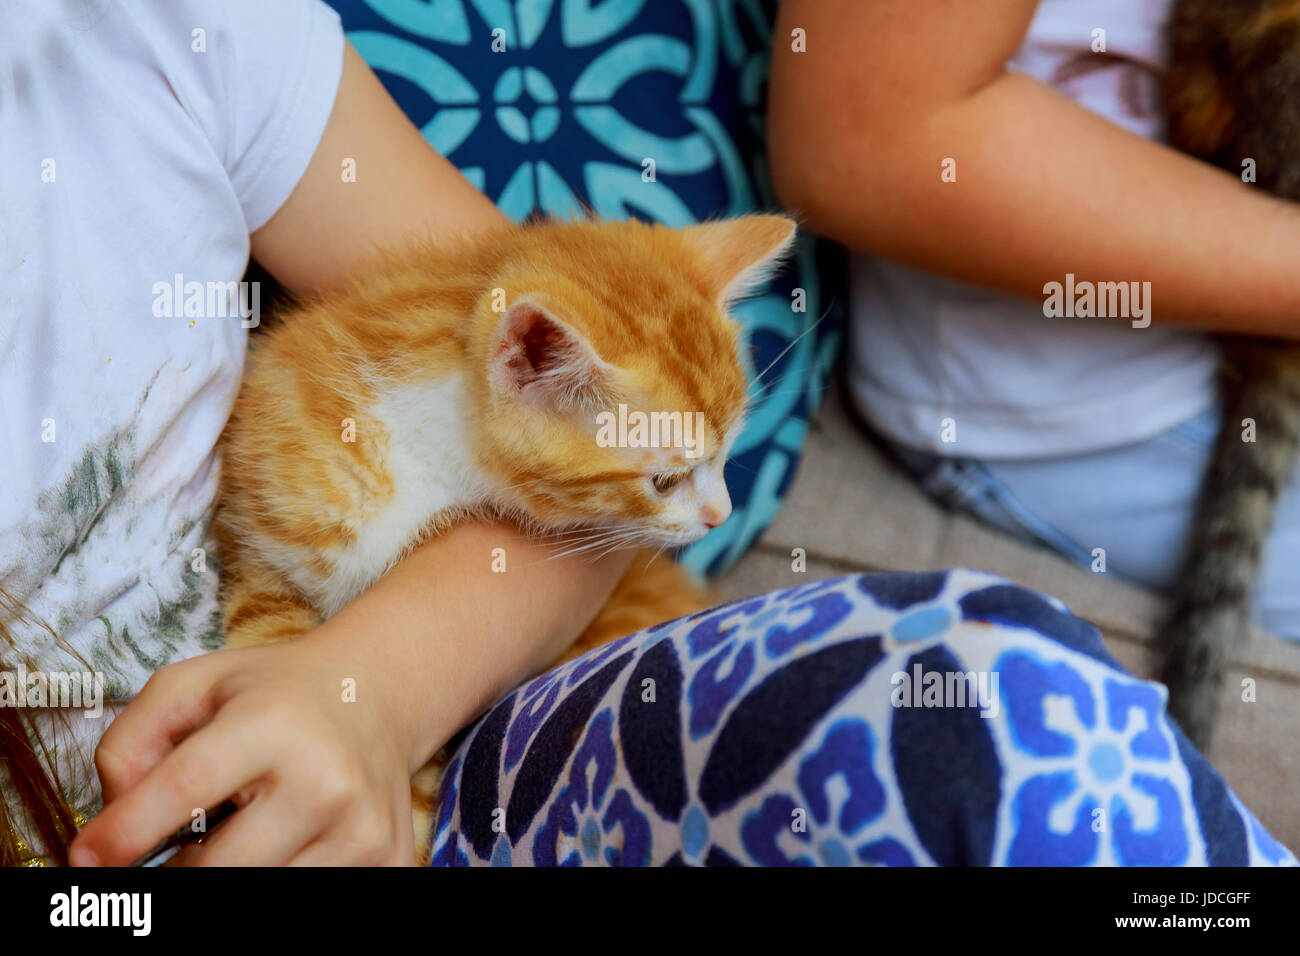 Newborn kitten in girl's hand. New born baby cat. Red kitty in caring hands. Cute baby cat close photo. Lovely kitty sleeping in hands. Sweet baby cat Stock Photo